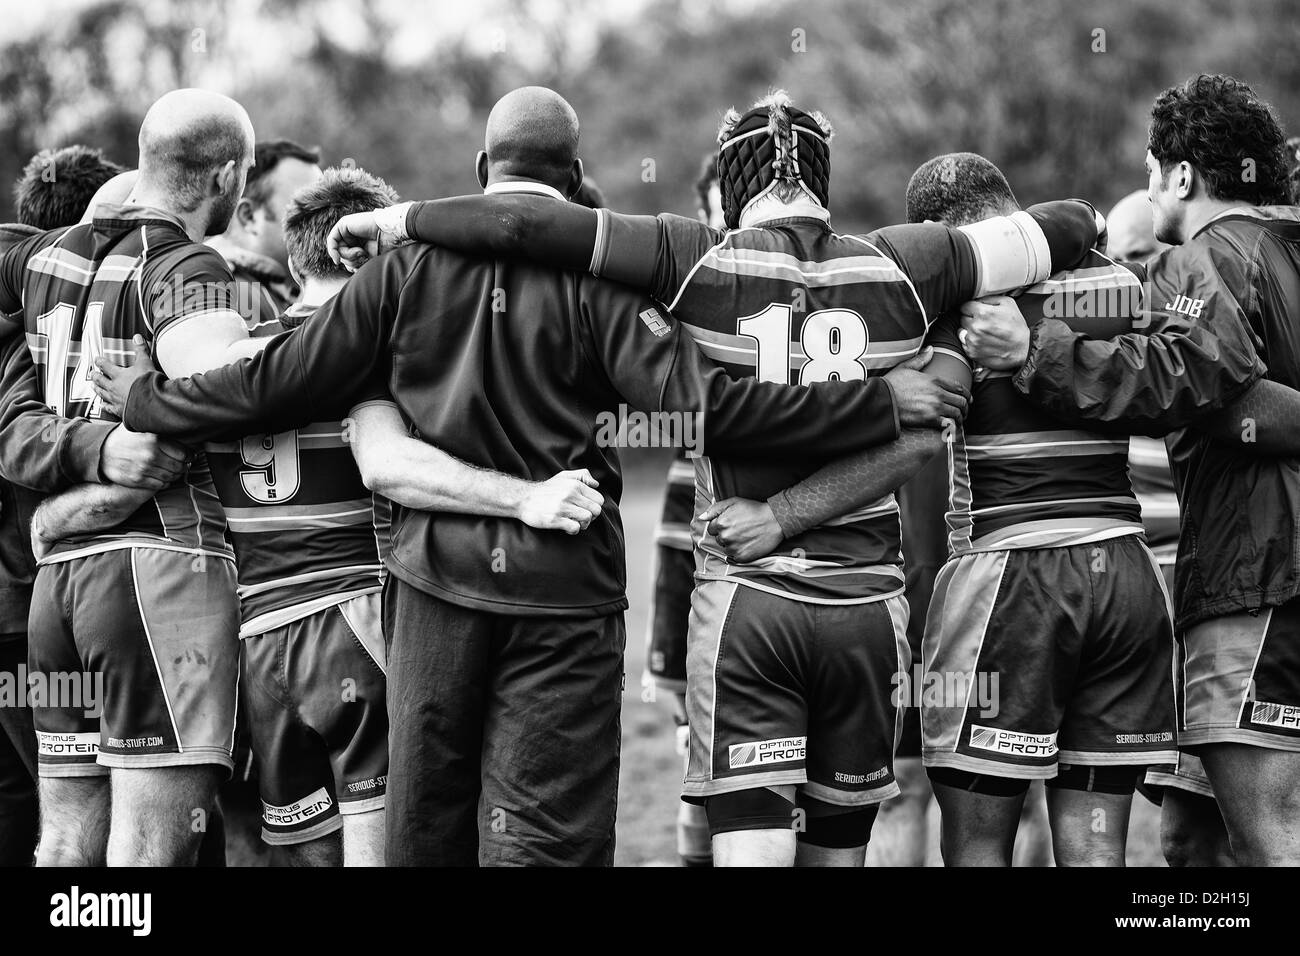 A team of rugby players huddle after a match Stock Photo